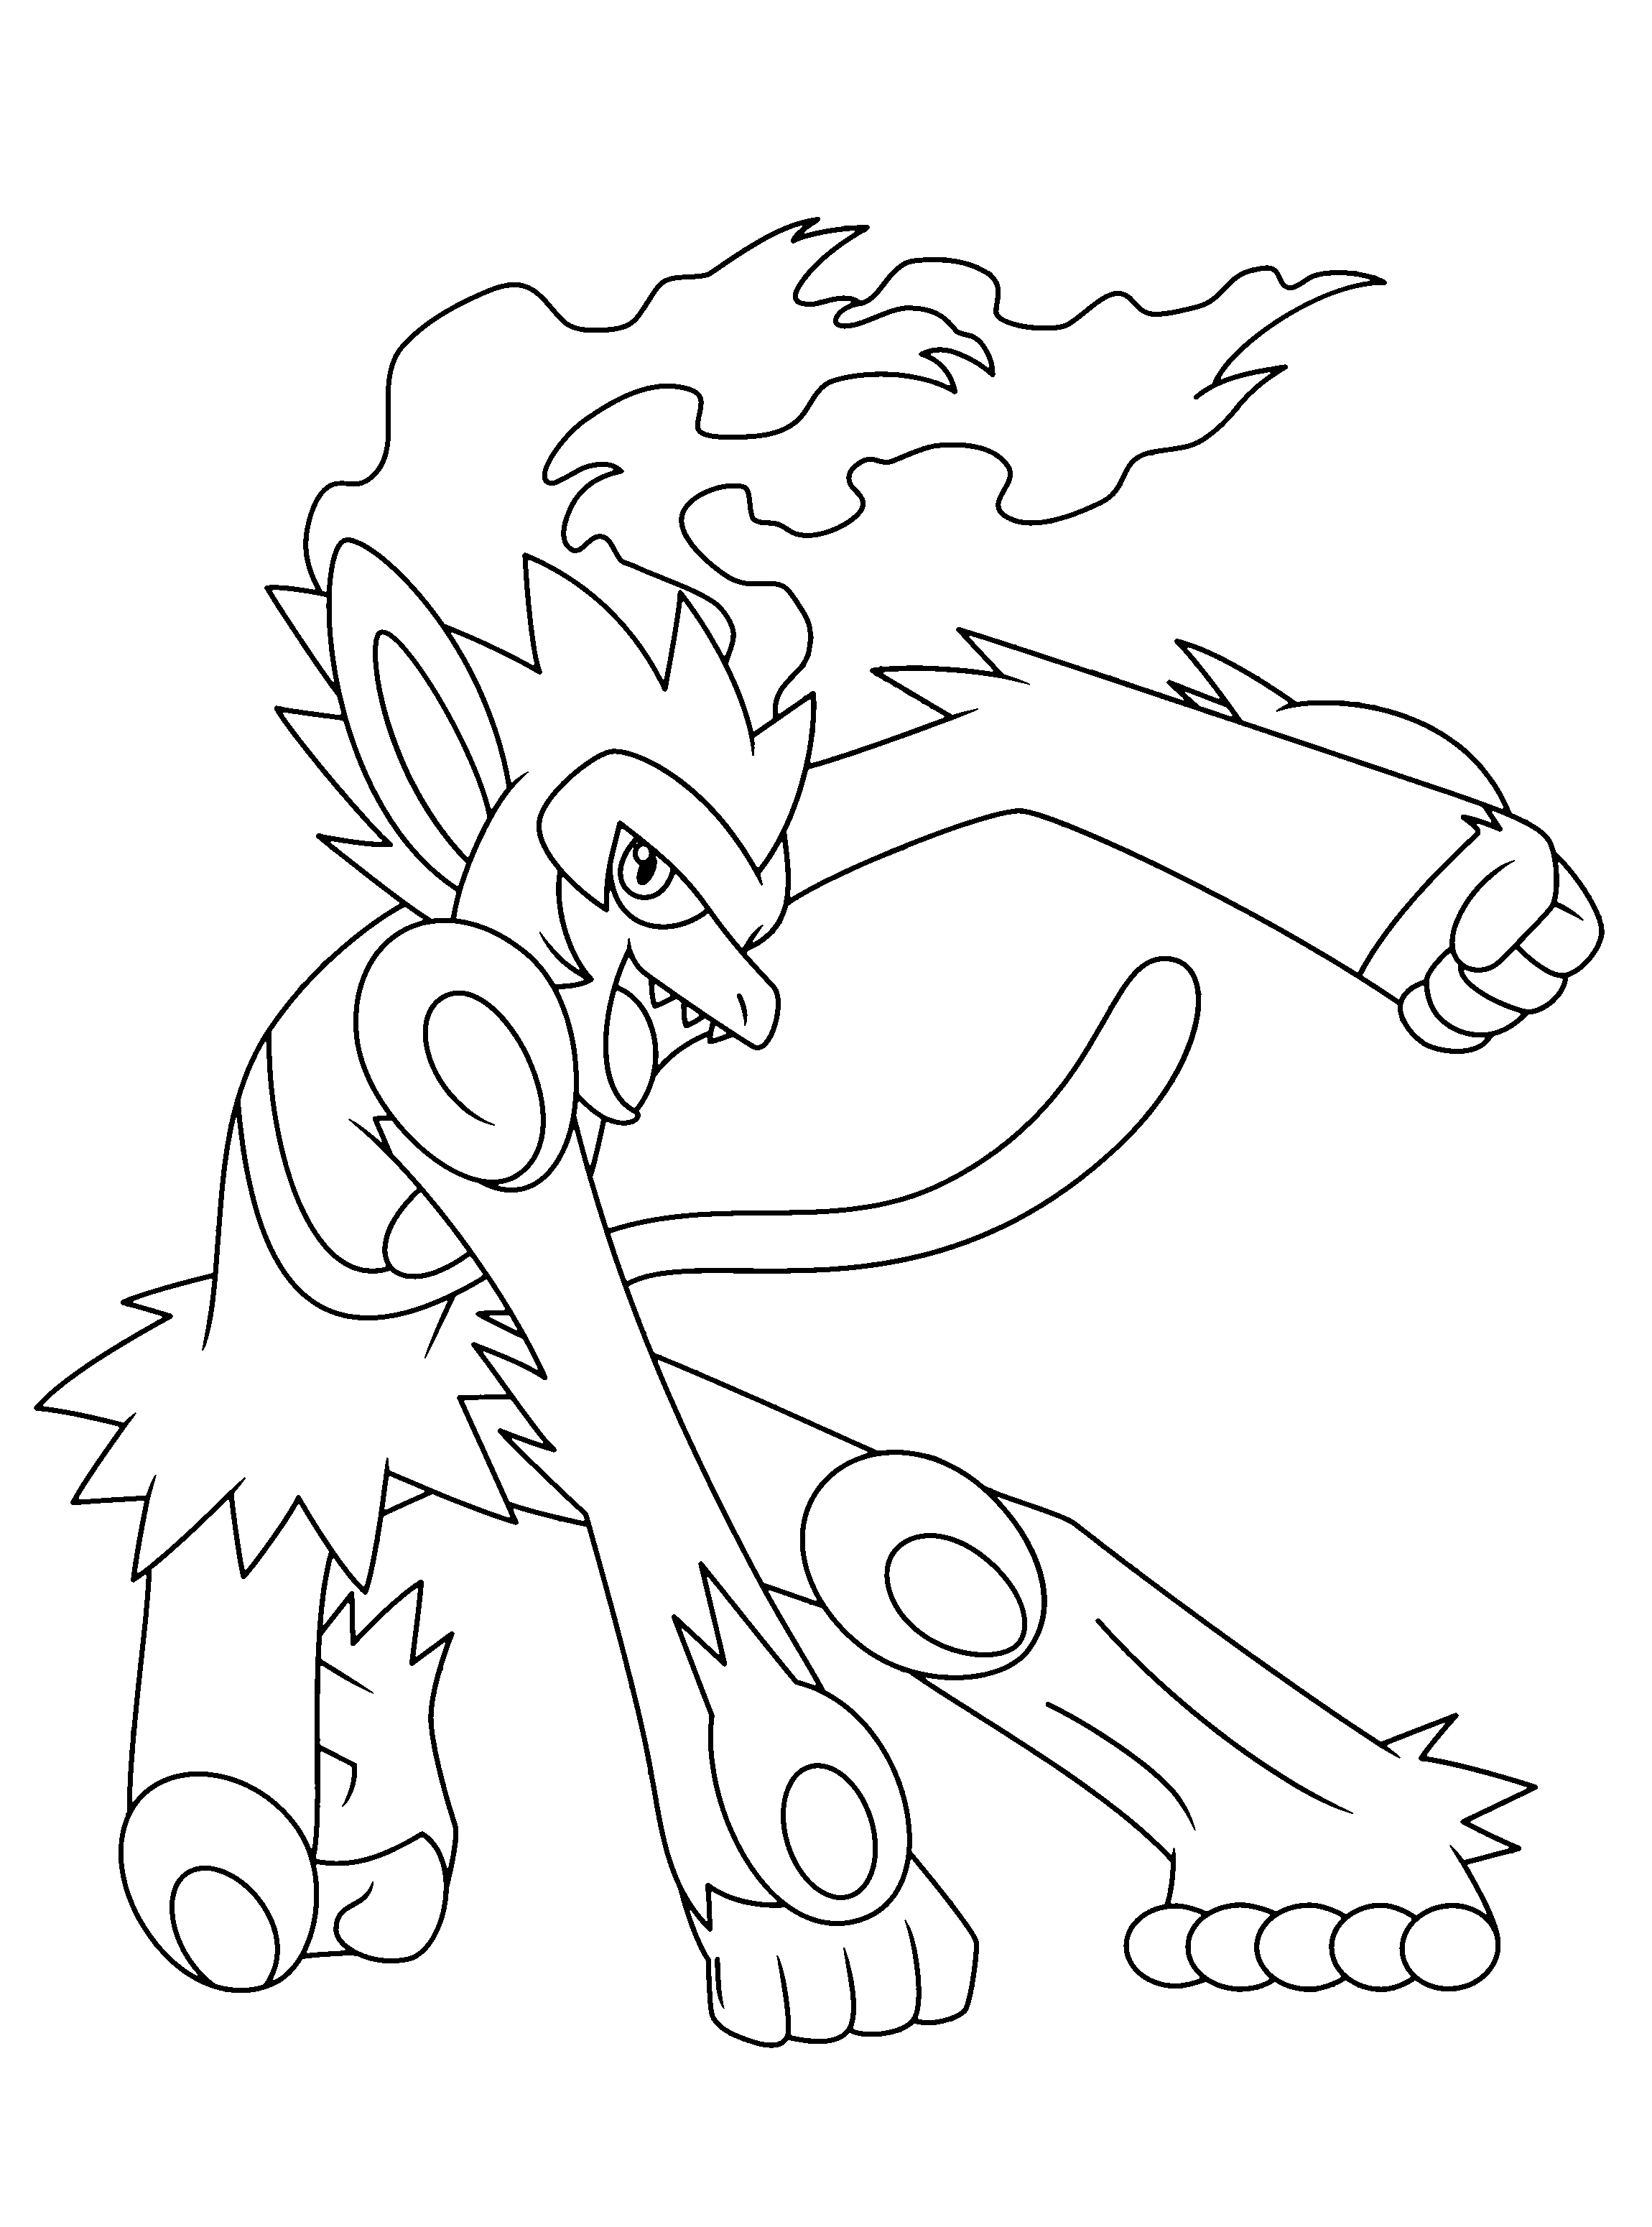 Coloring pages. 